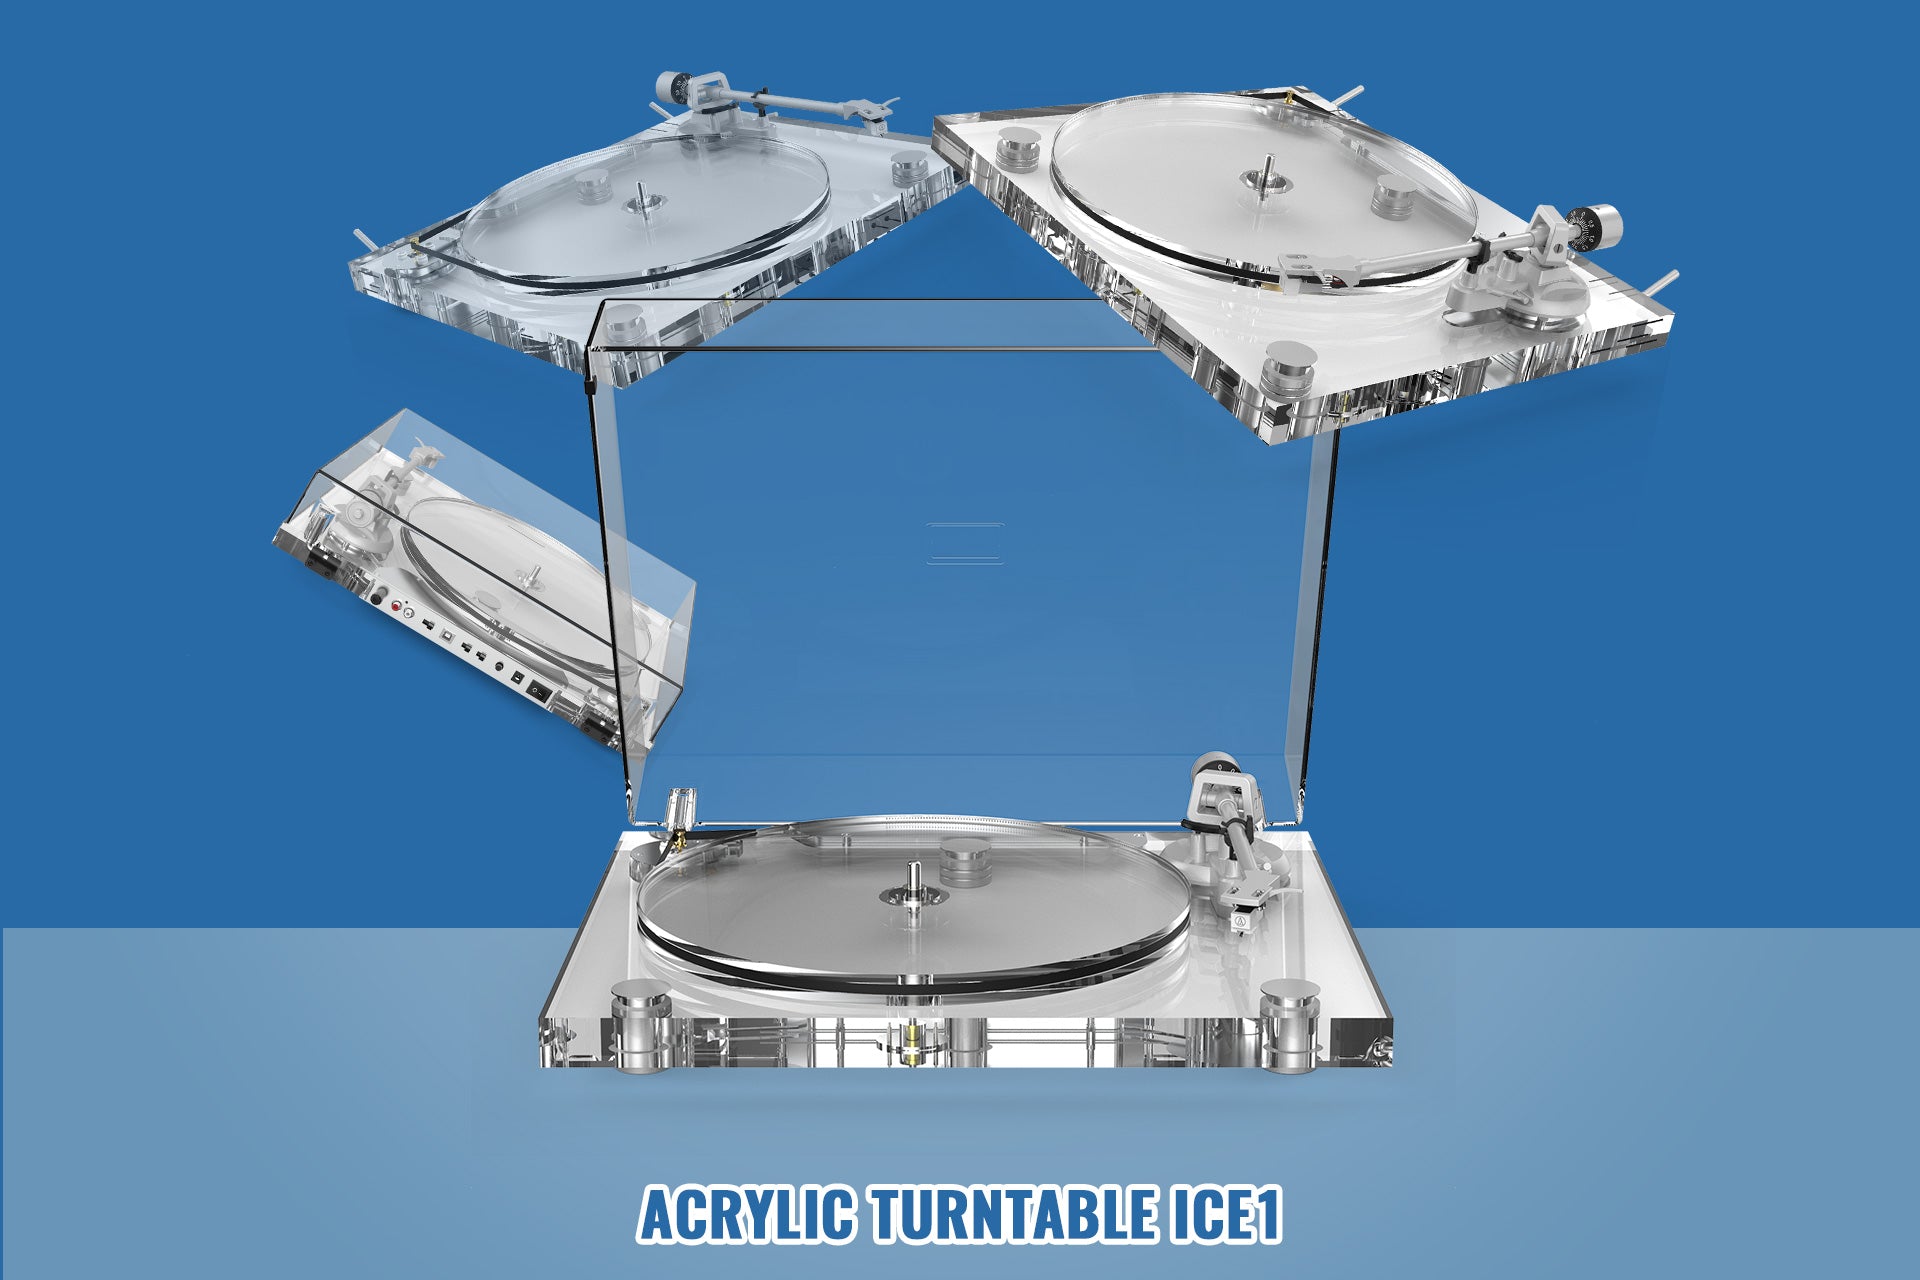 Learn About Audio Keeper's First Acrylic Turntable ICE1